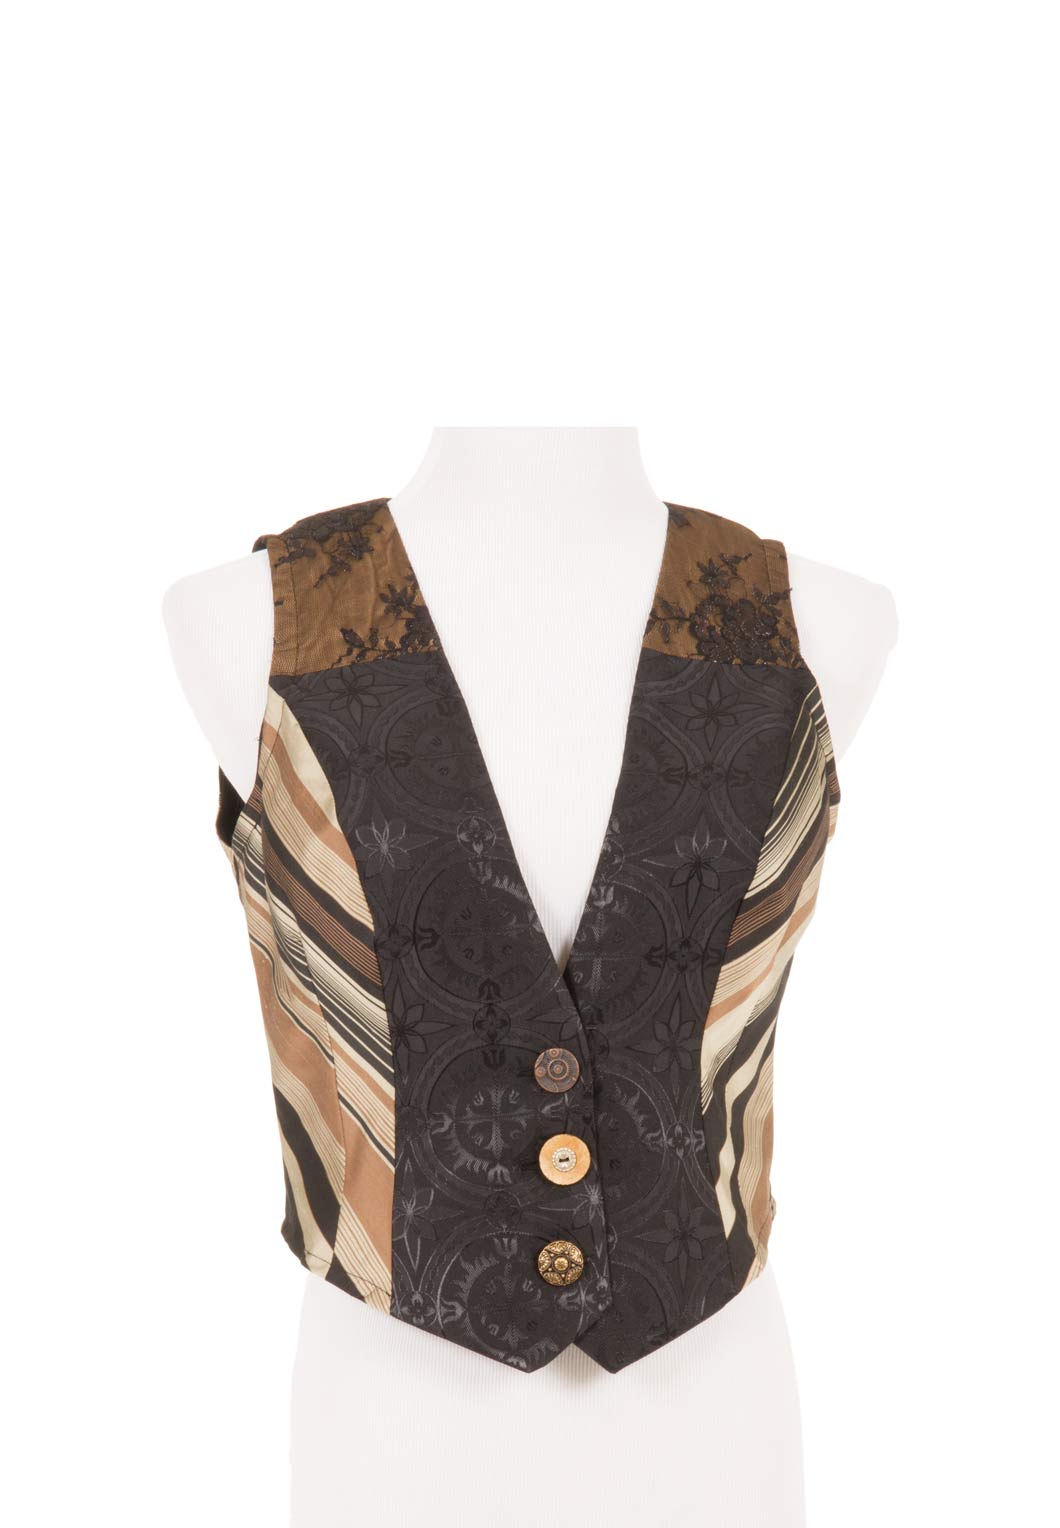 Edwardian Vests from Recollections